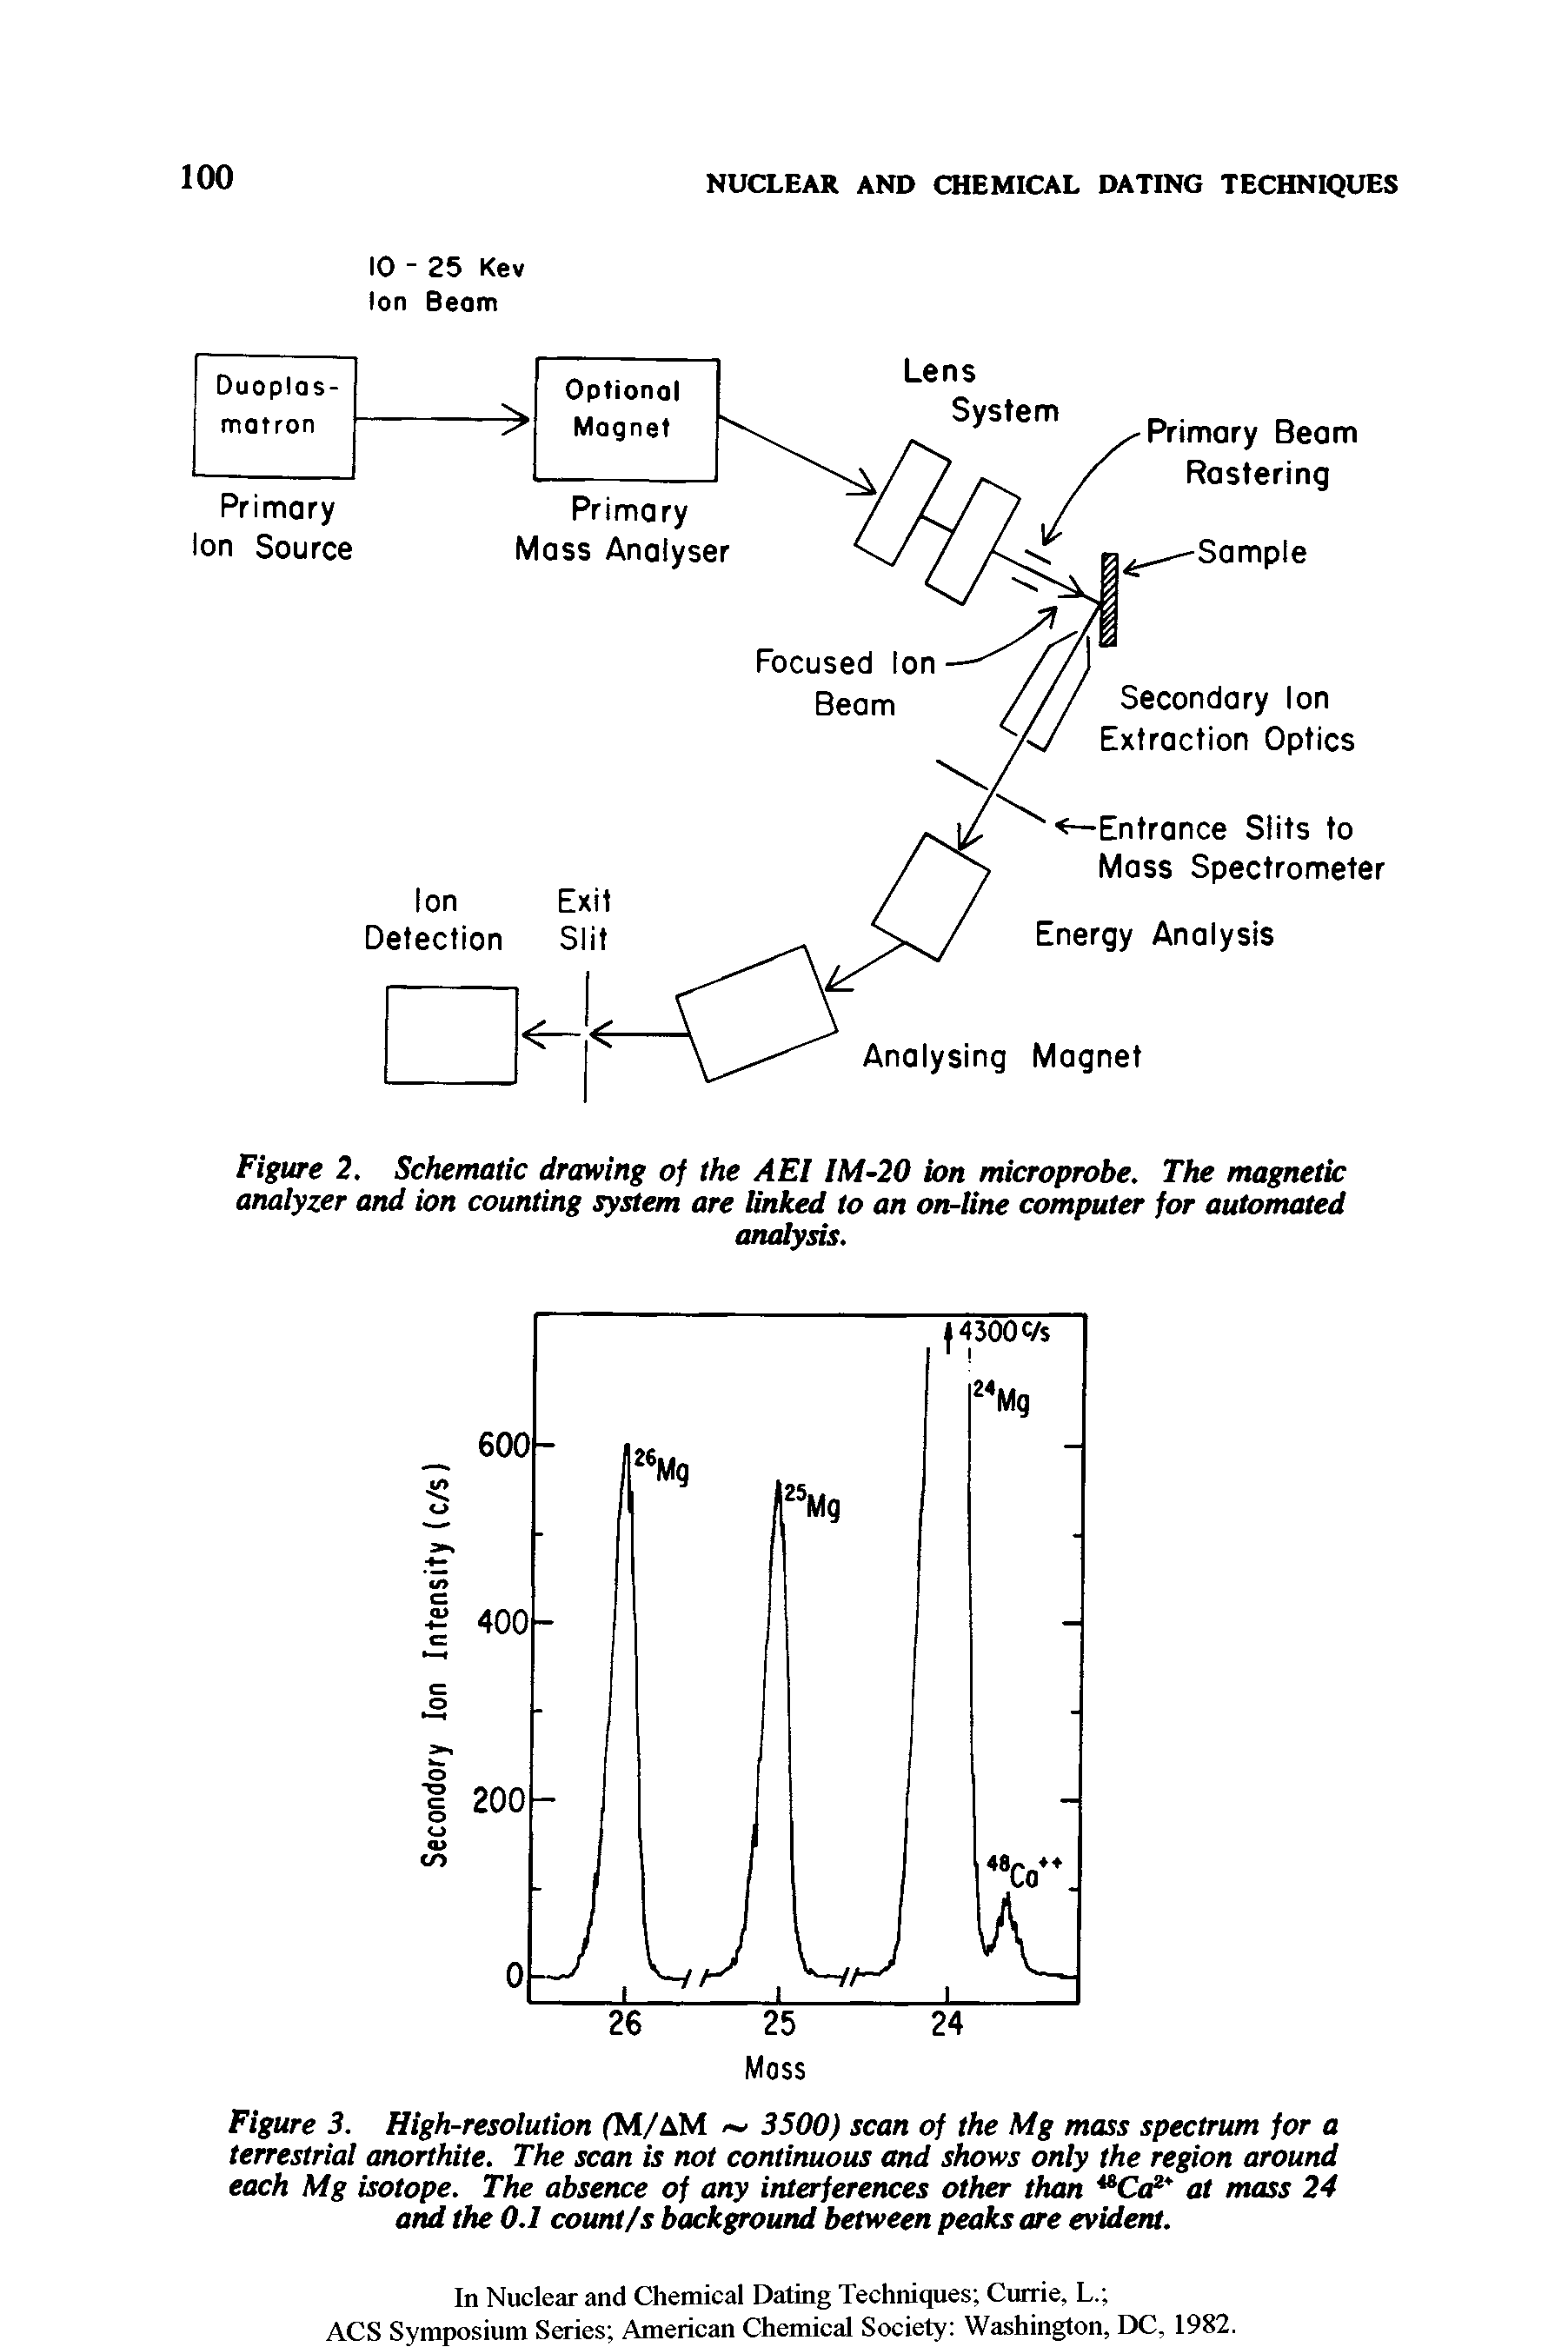 Figure 2. Schematic drawing of the AEl IM-20 ion microprobe. The magnetic analyzer and ion counting system are linked to an on-line computer for automated...